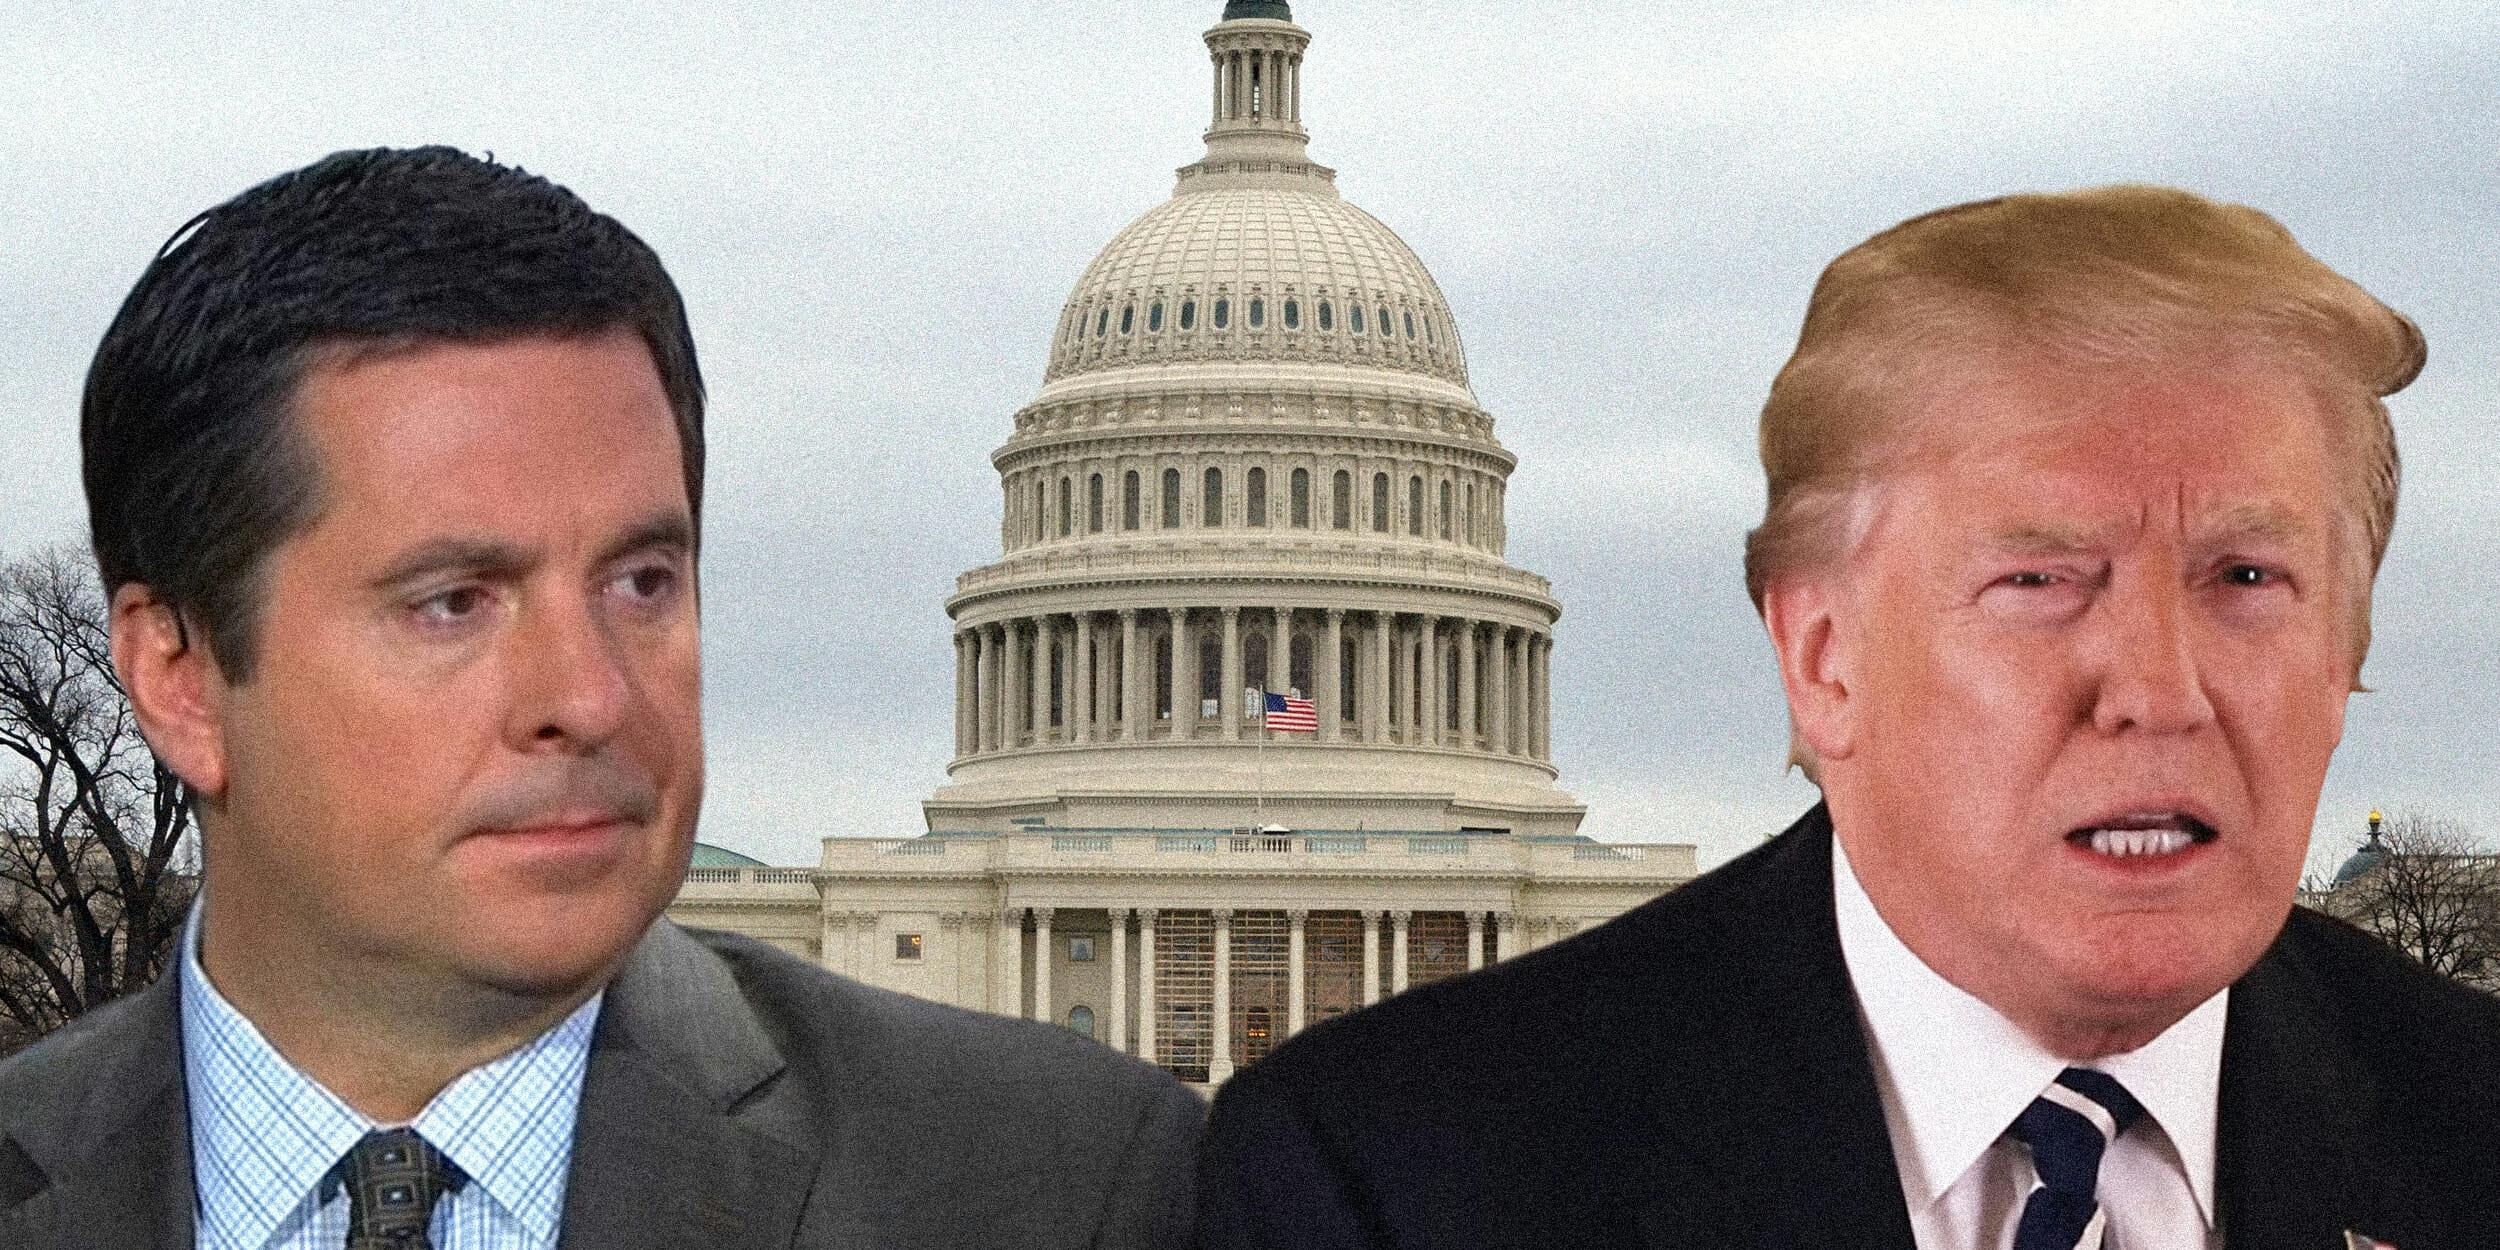 Devin Nunes and Donald Trump in front of the US Capitol building